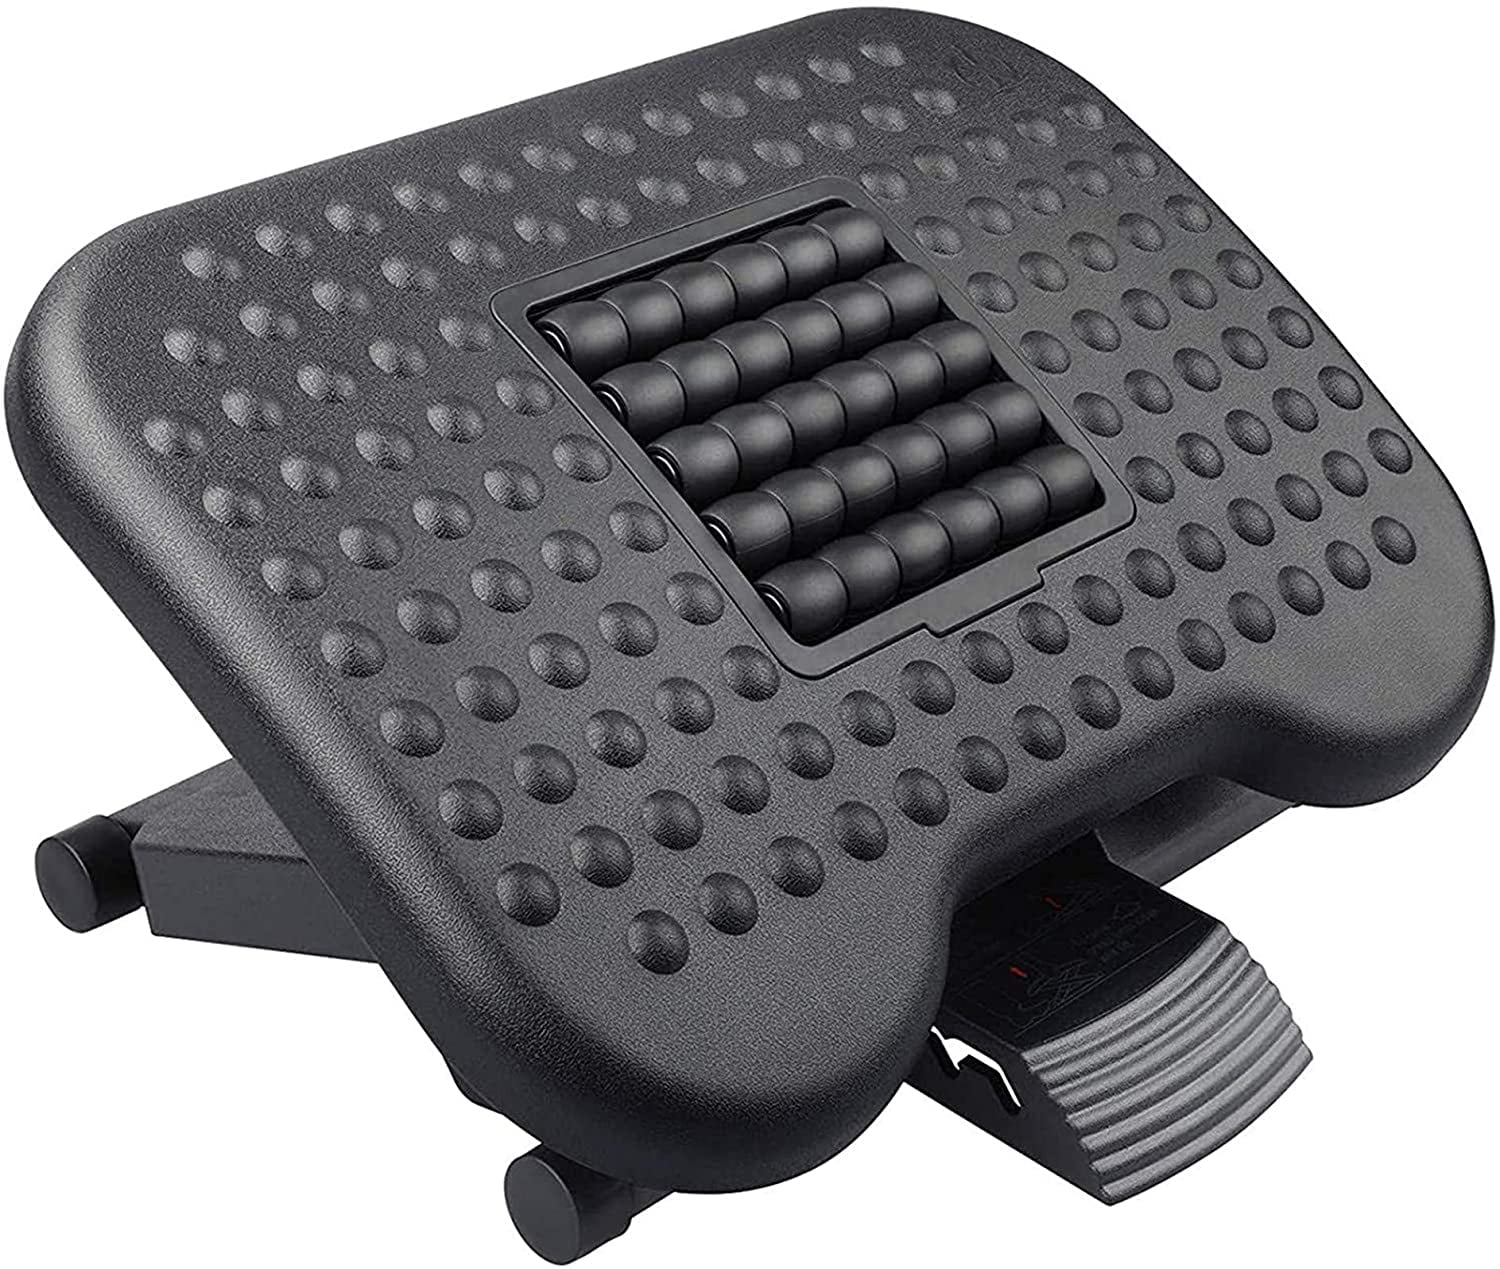 Dropship Foot Rest Under Desk Ergonomic Footrest Cushion ,office Footrest  Pillow Massage to Sell Online at a Lower Price